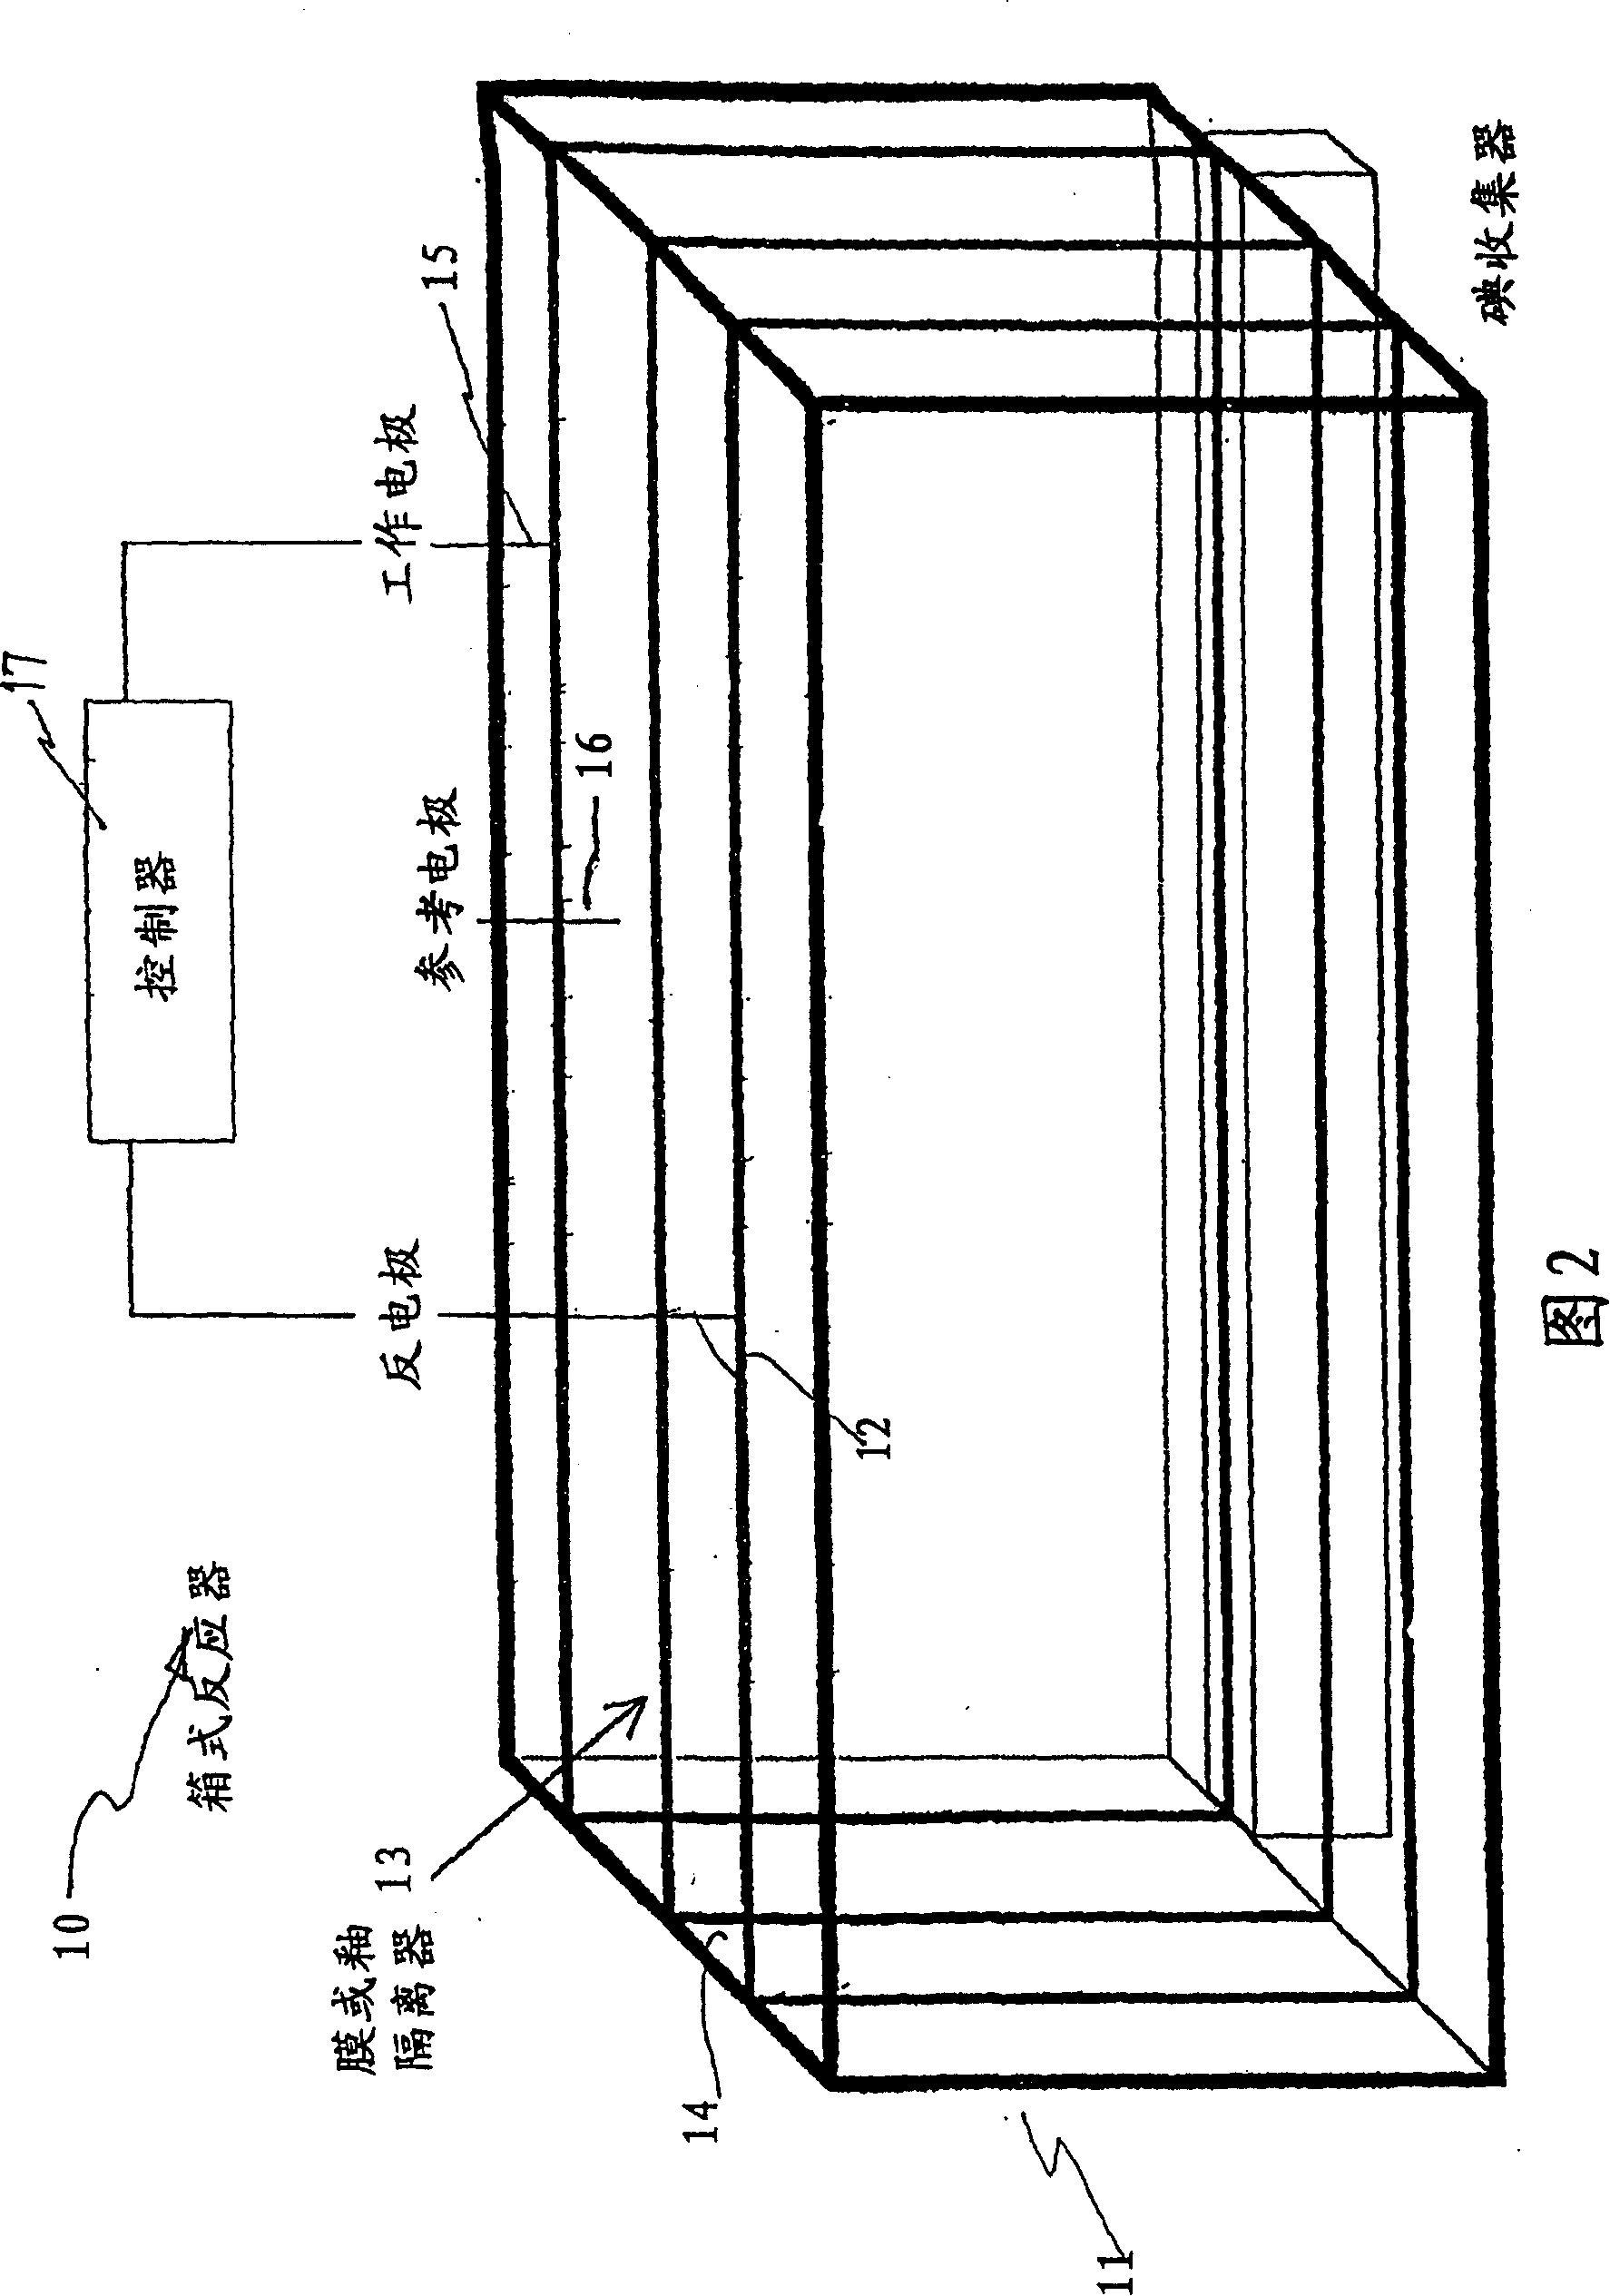 Process and method for recovery of halogens